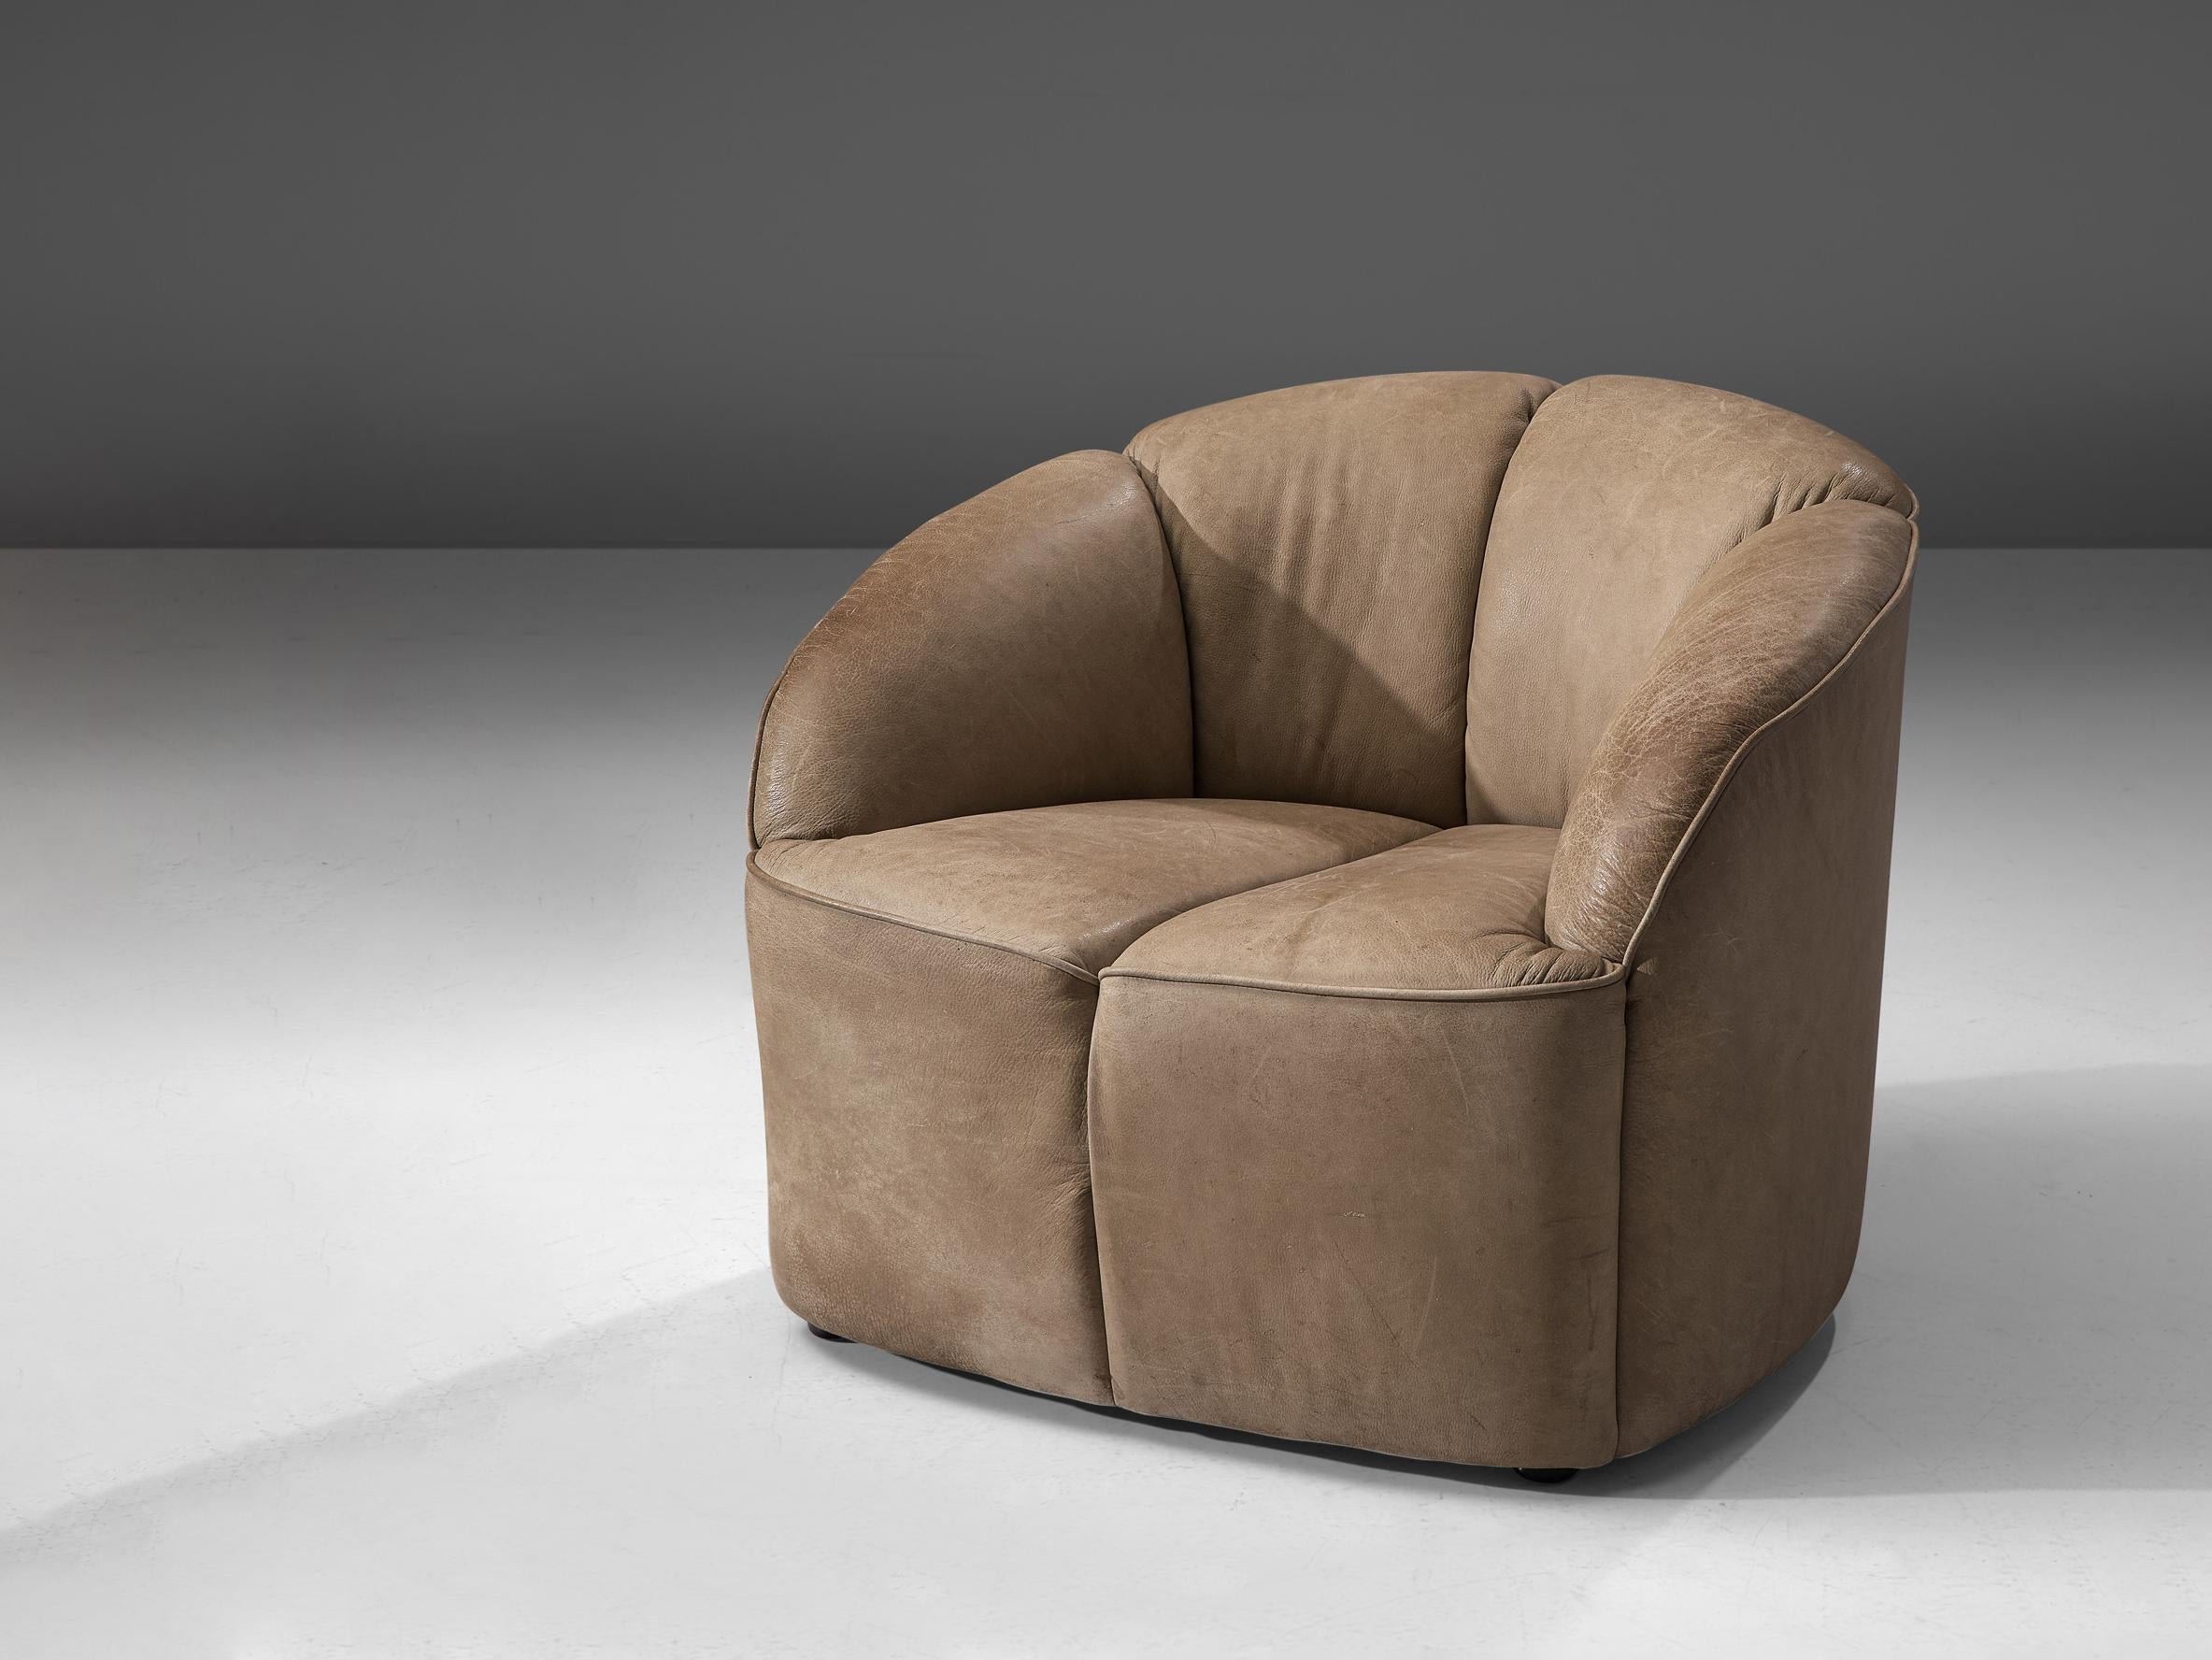 Walter Knoll, 'Piccolino' lounge chair, leather, Germany, 1960s

This half round lounge chair by Walter Knoll is designed in the 1960s. This model is called Piccolino and has thick, high quality leather upholstery. The bulky lounge chair has a